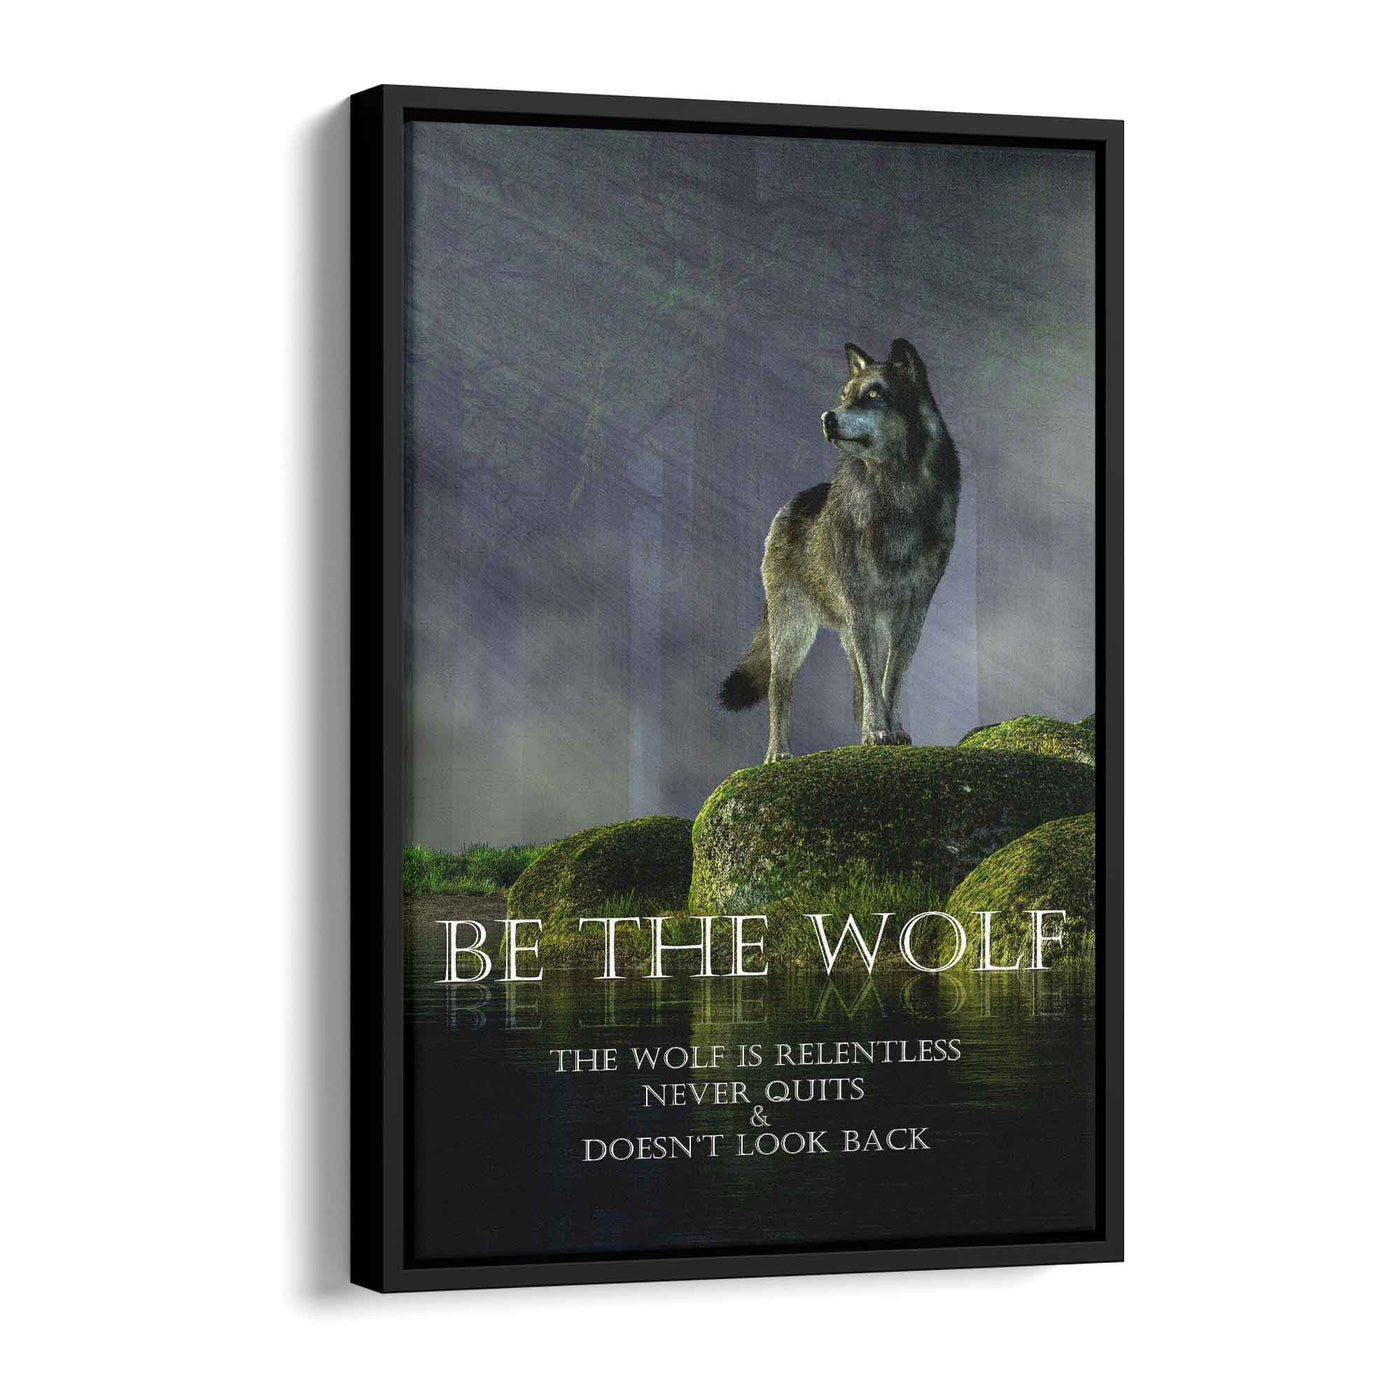 Be the wolf